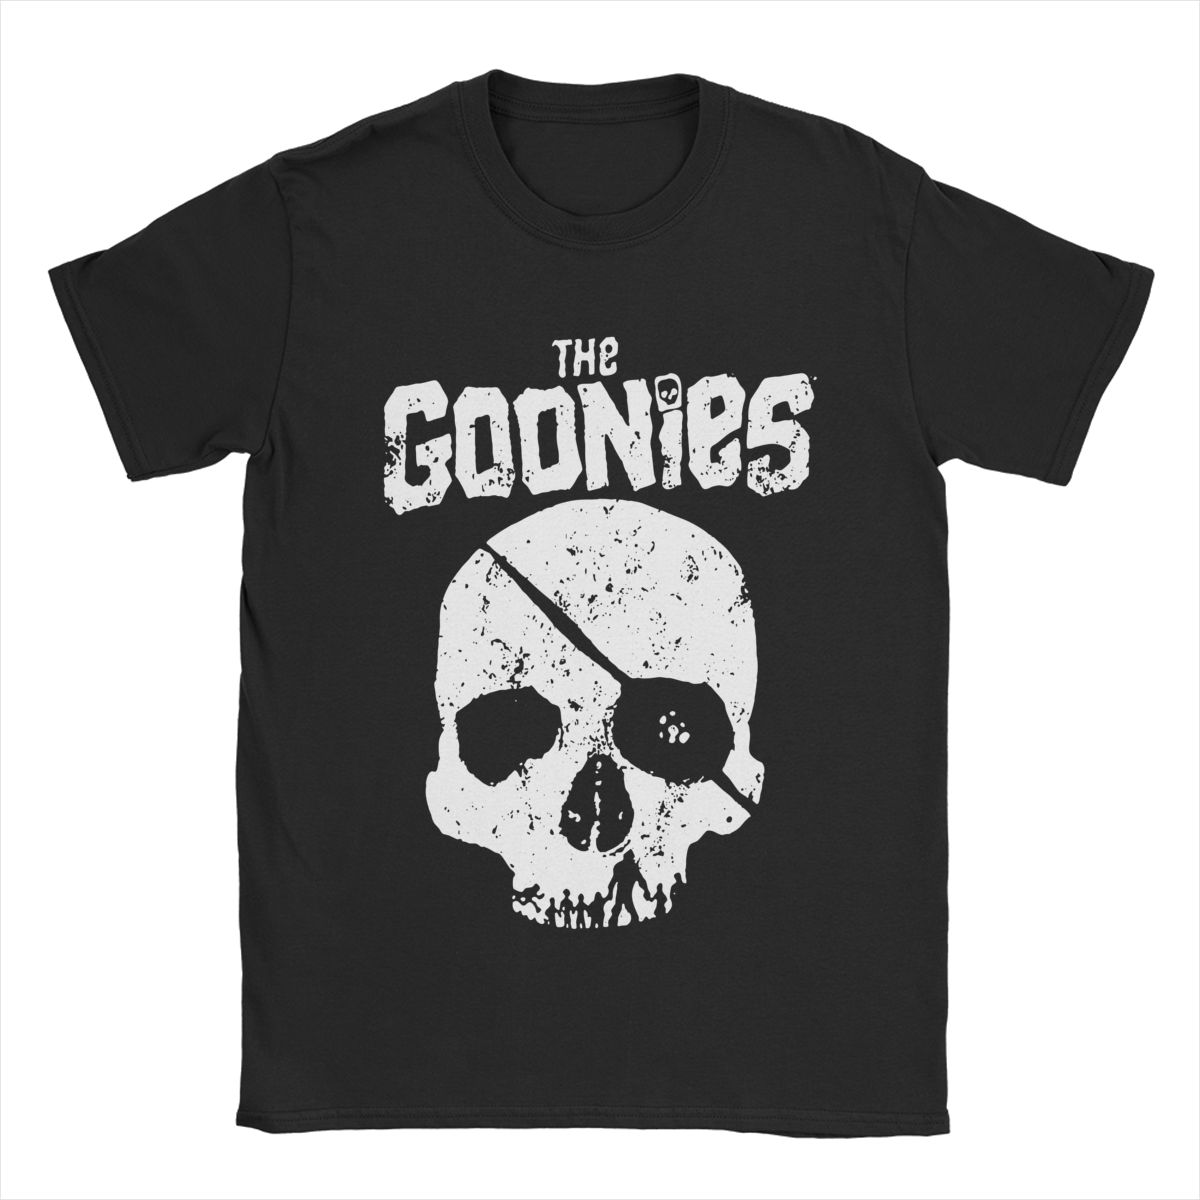 The Goonies - Classic 80s - Cult Childrens Movie - Vintage Film Lover T-Shirt-Black-S-